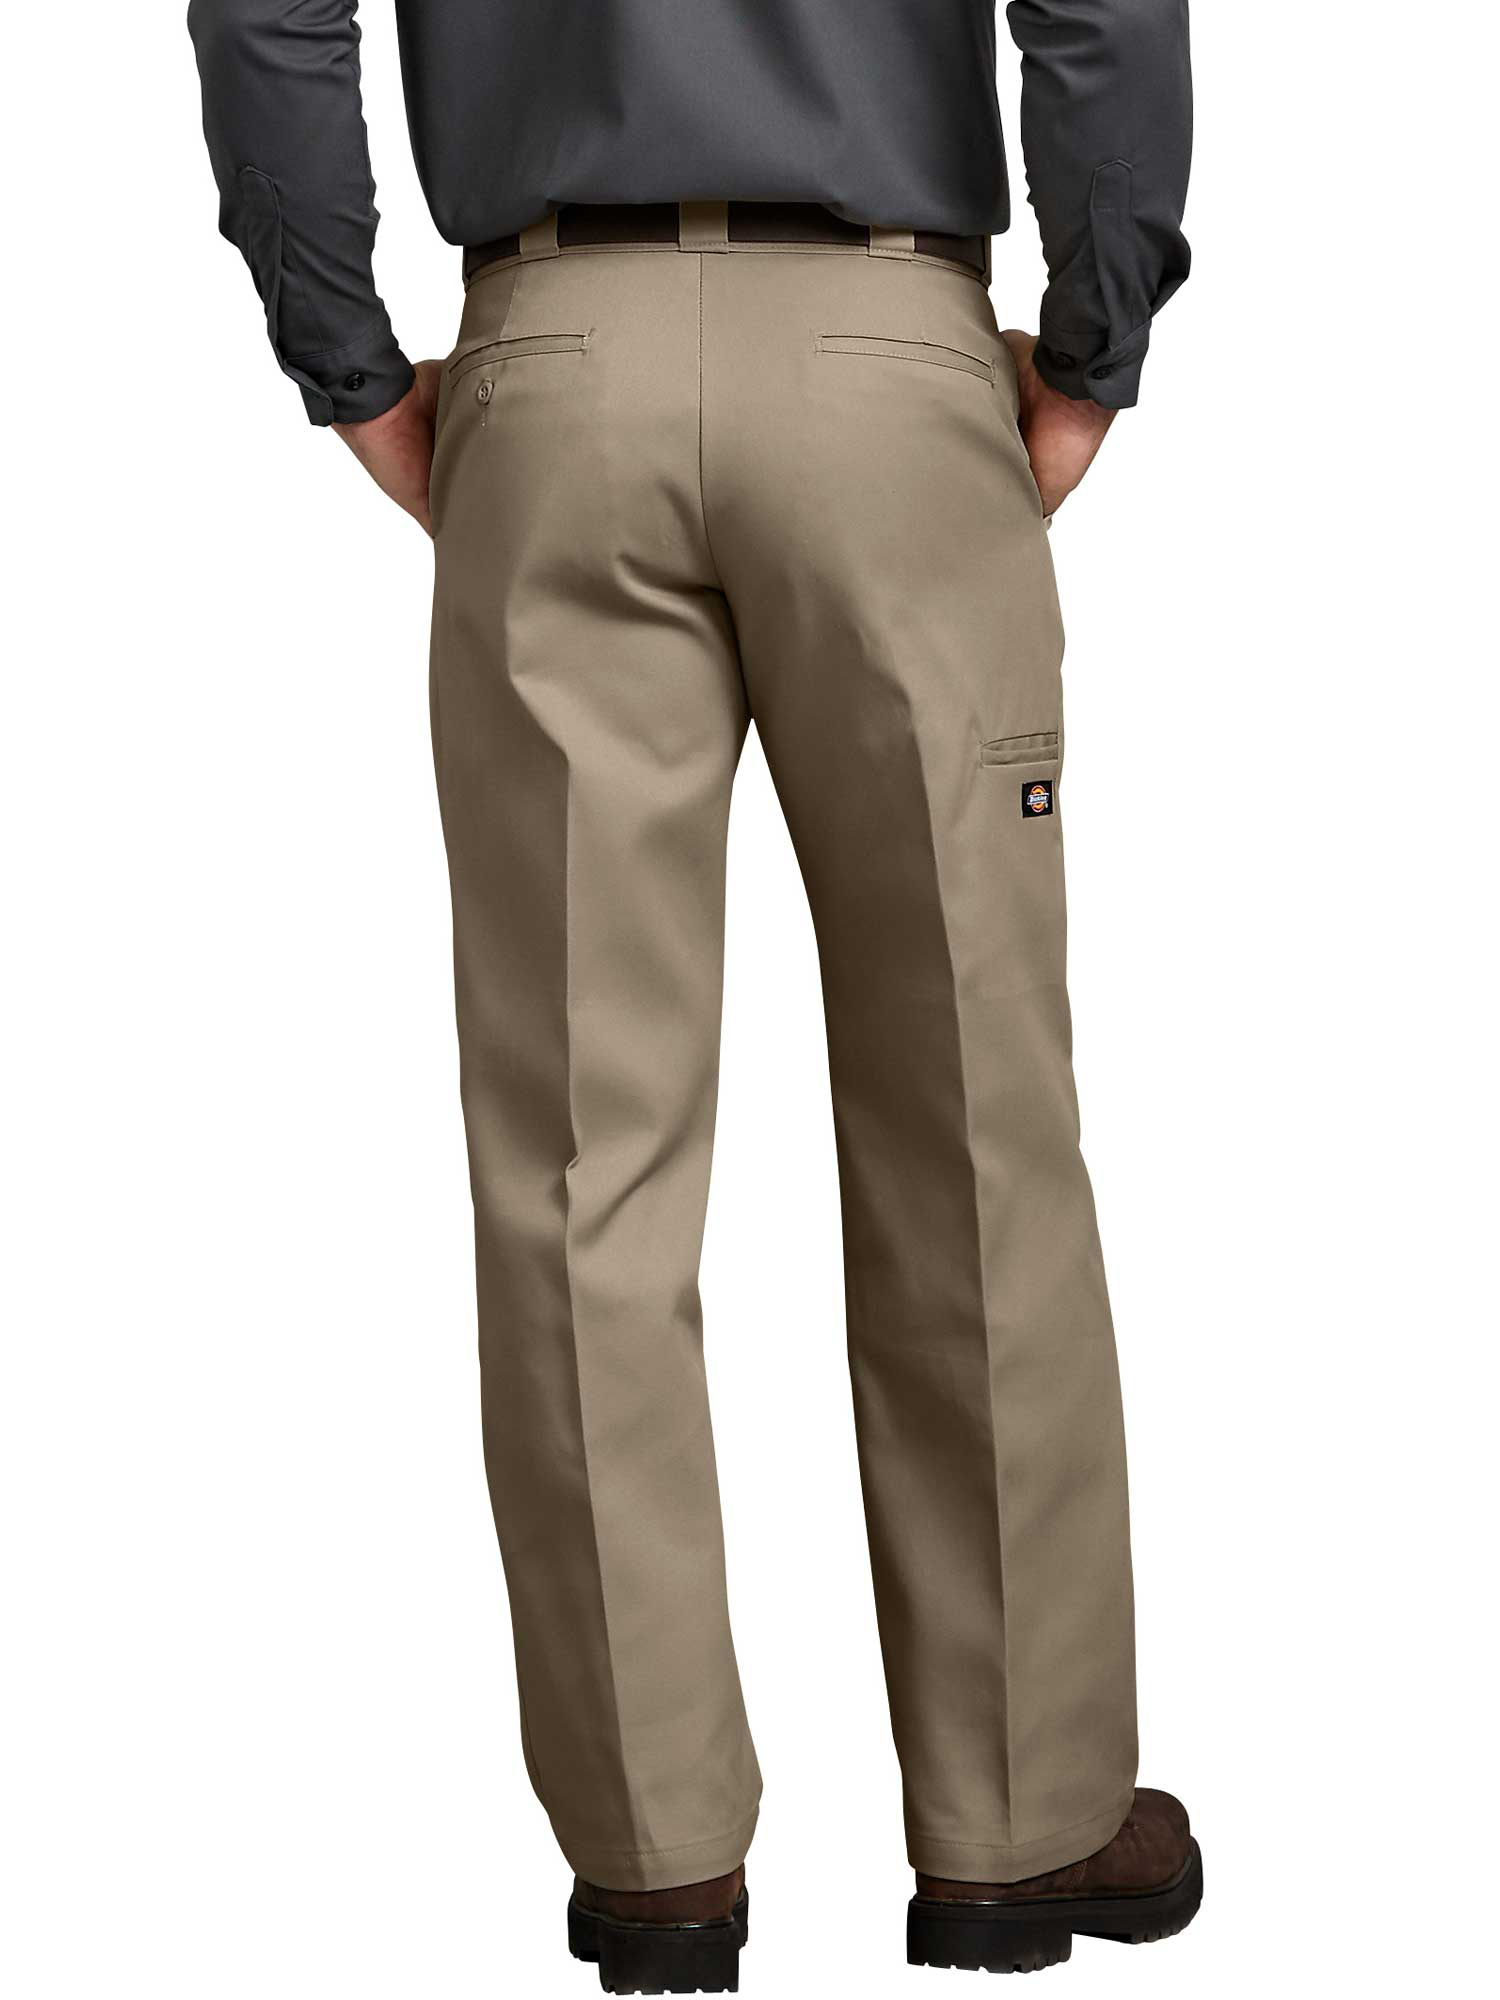 Dickies Mens Relaxed Fit Straight Leg Double Knee Pants - image 2 of 3